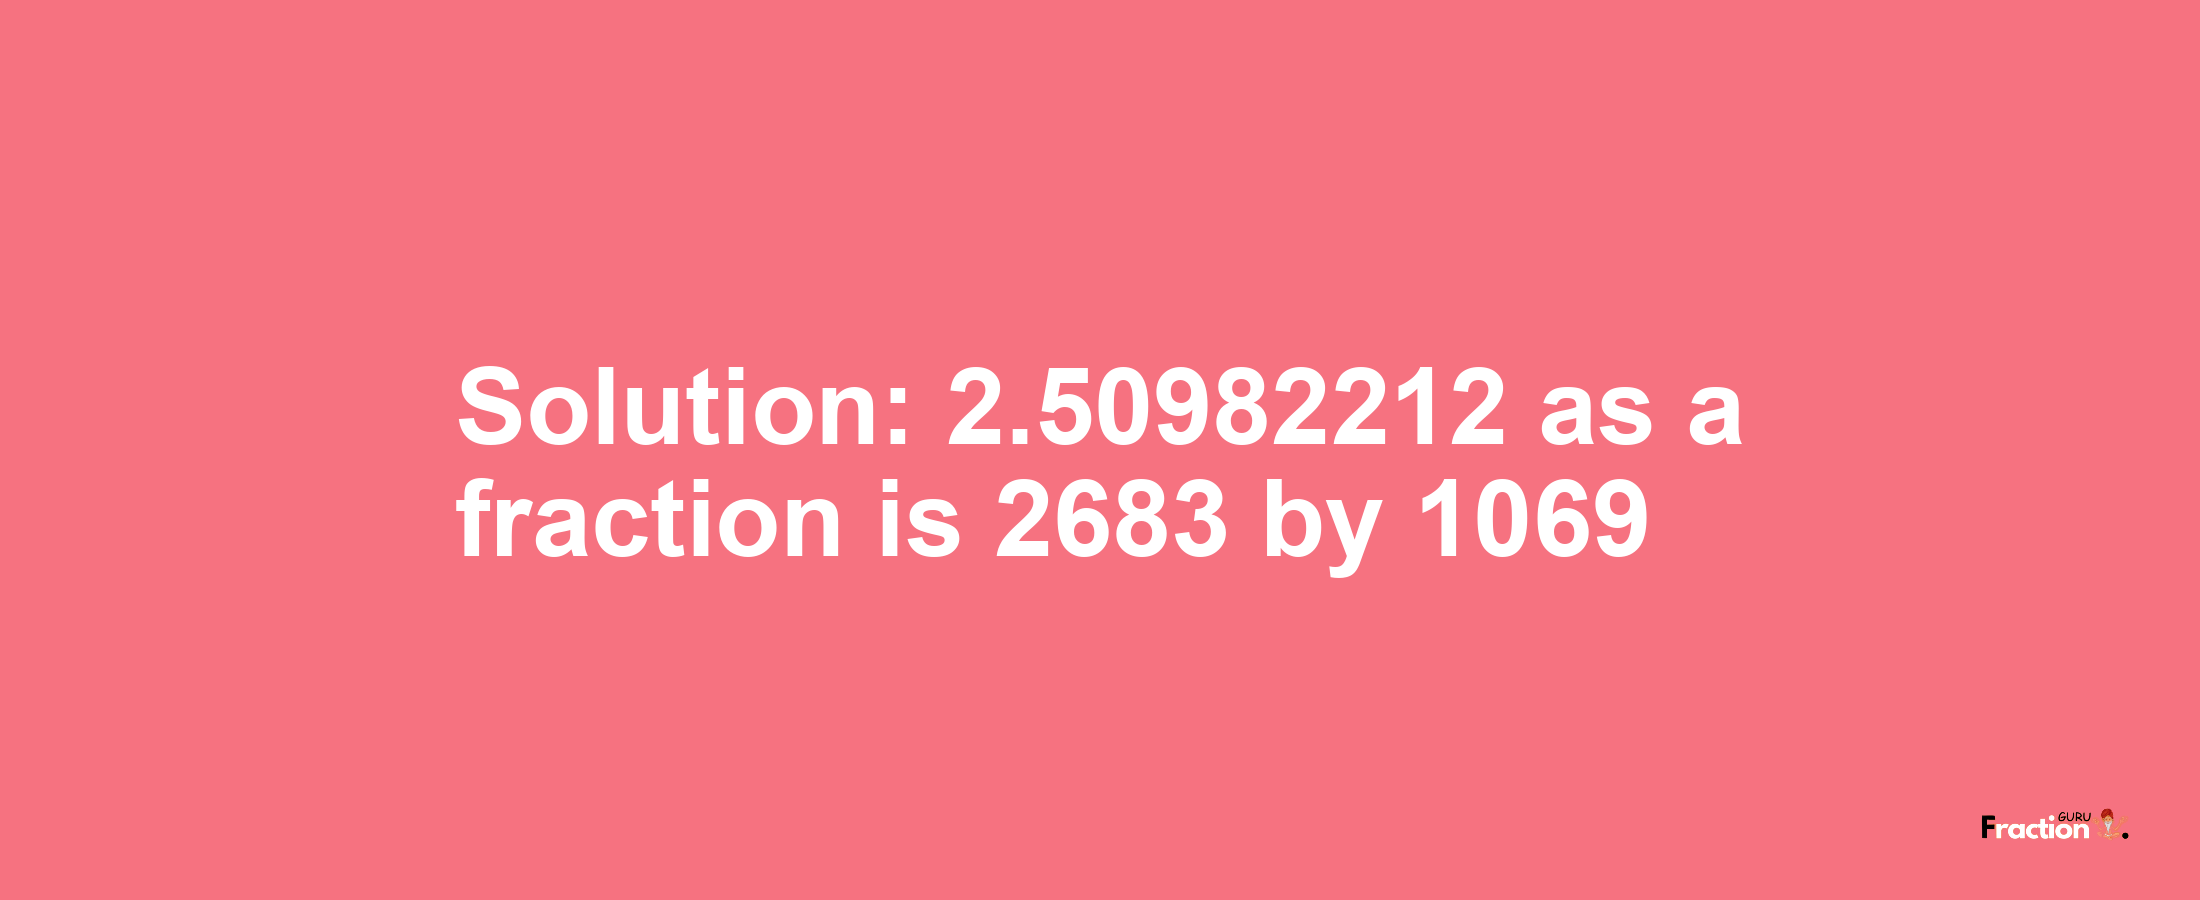 Solution:2.50982212 as a fraction is 2683/1069